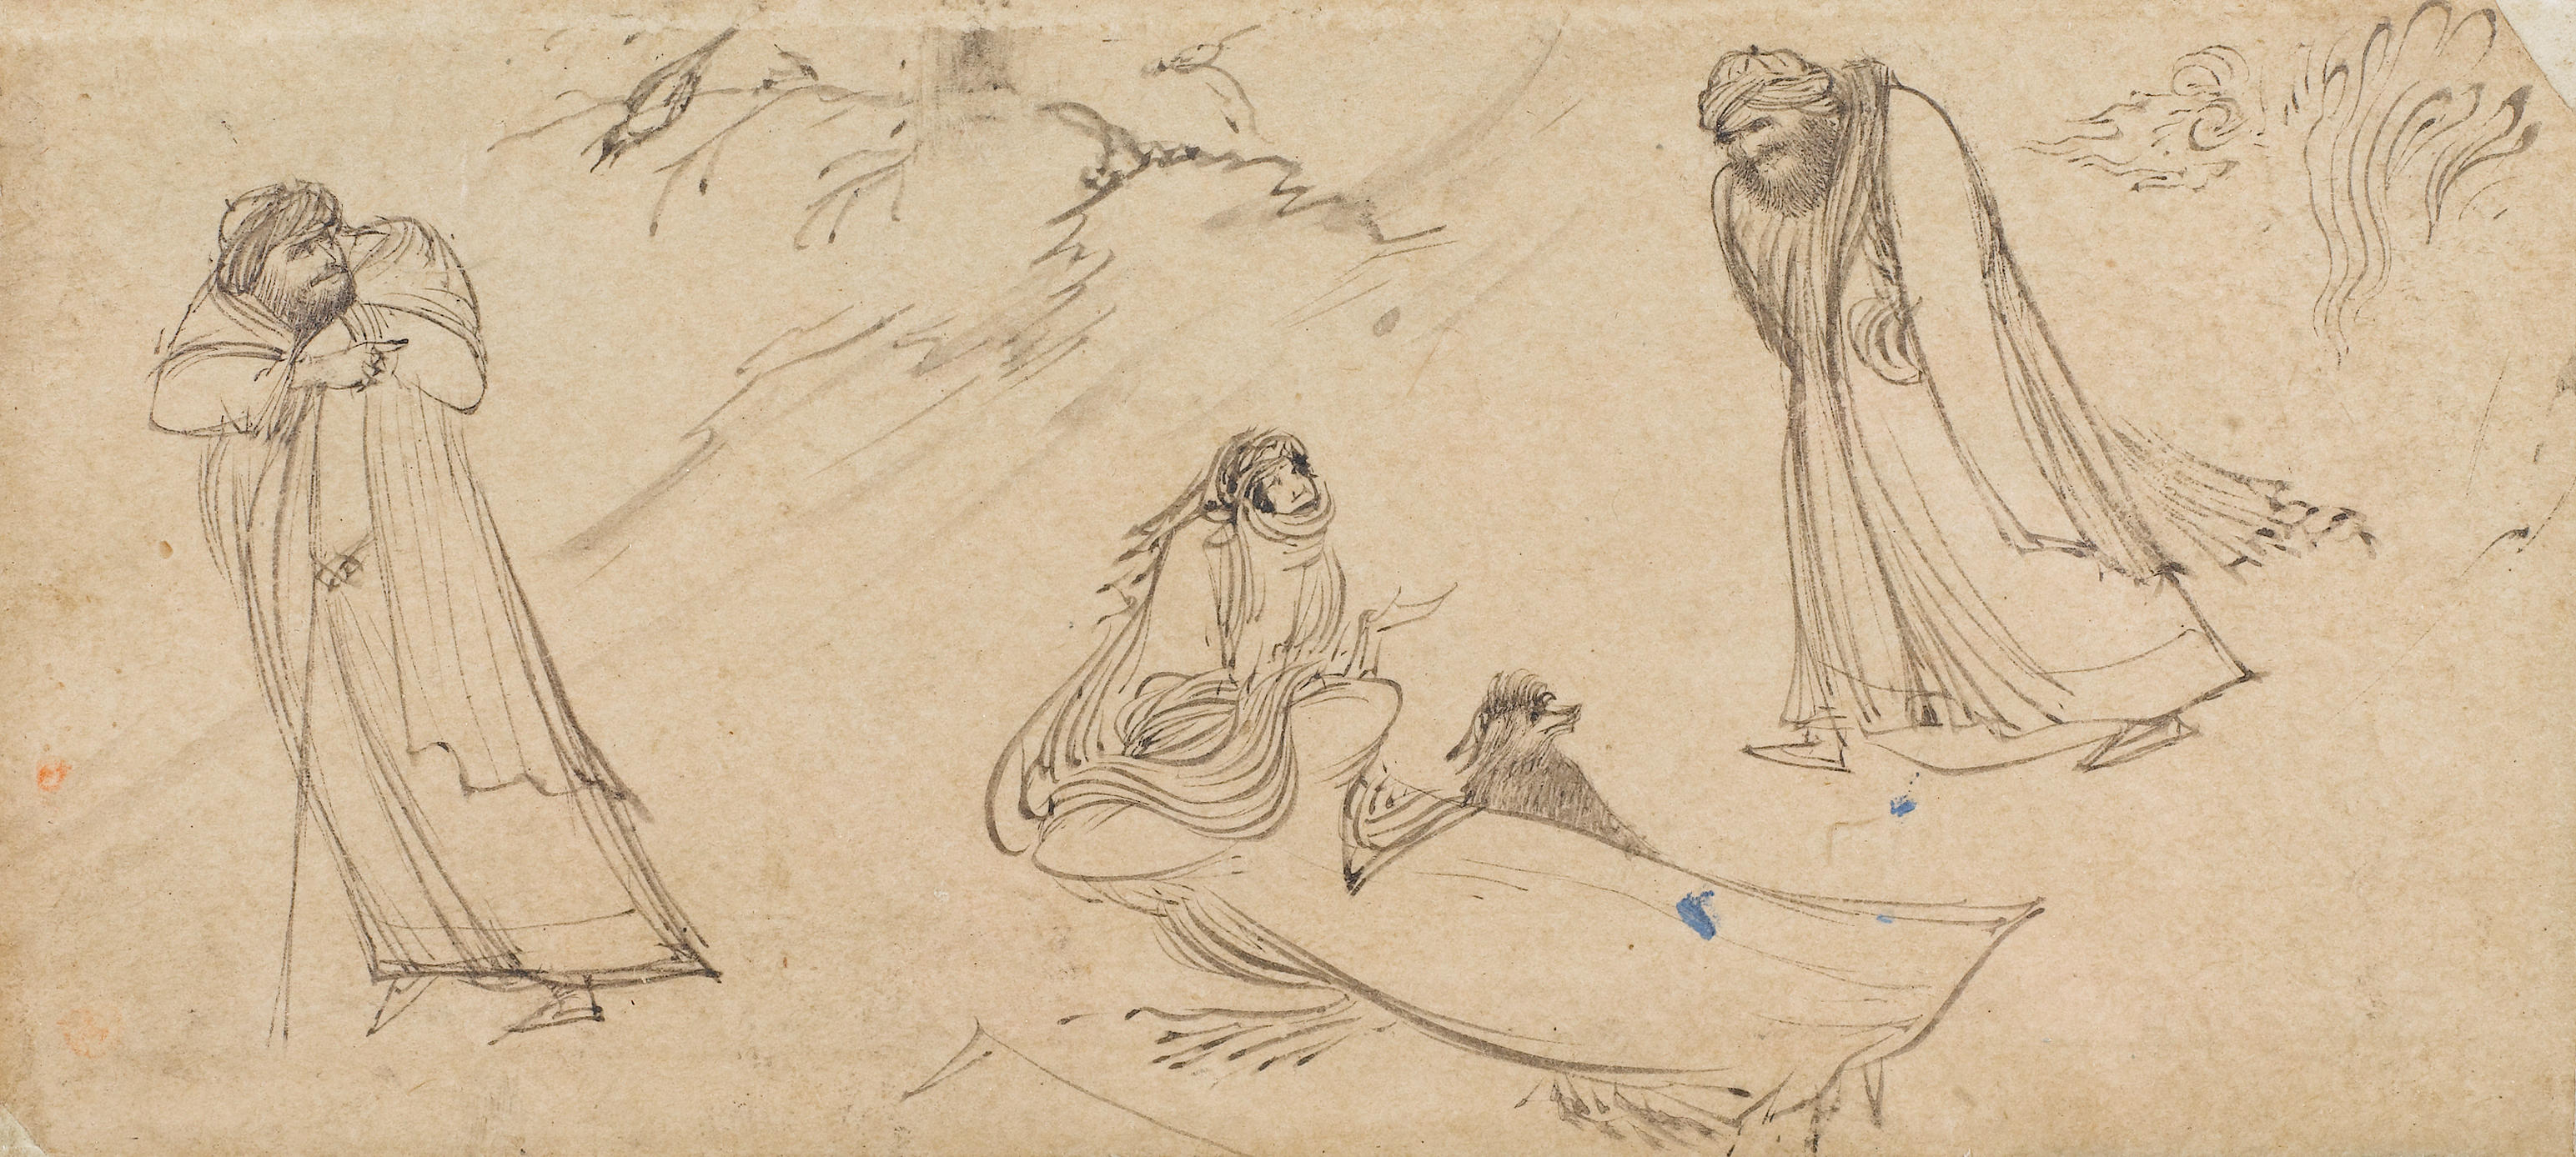 Bonhams A Maiden In Conversation With Two Elderly Men In A Landscape Persia In The Style Of